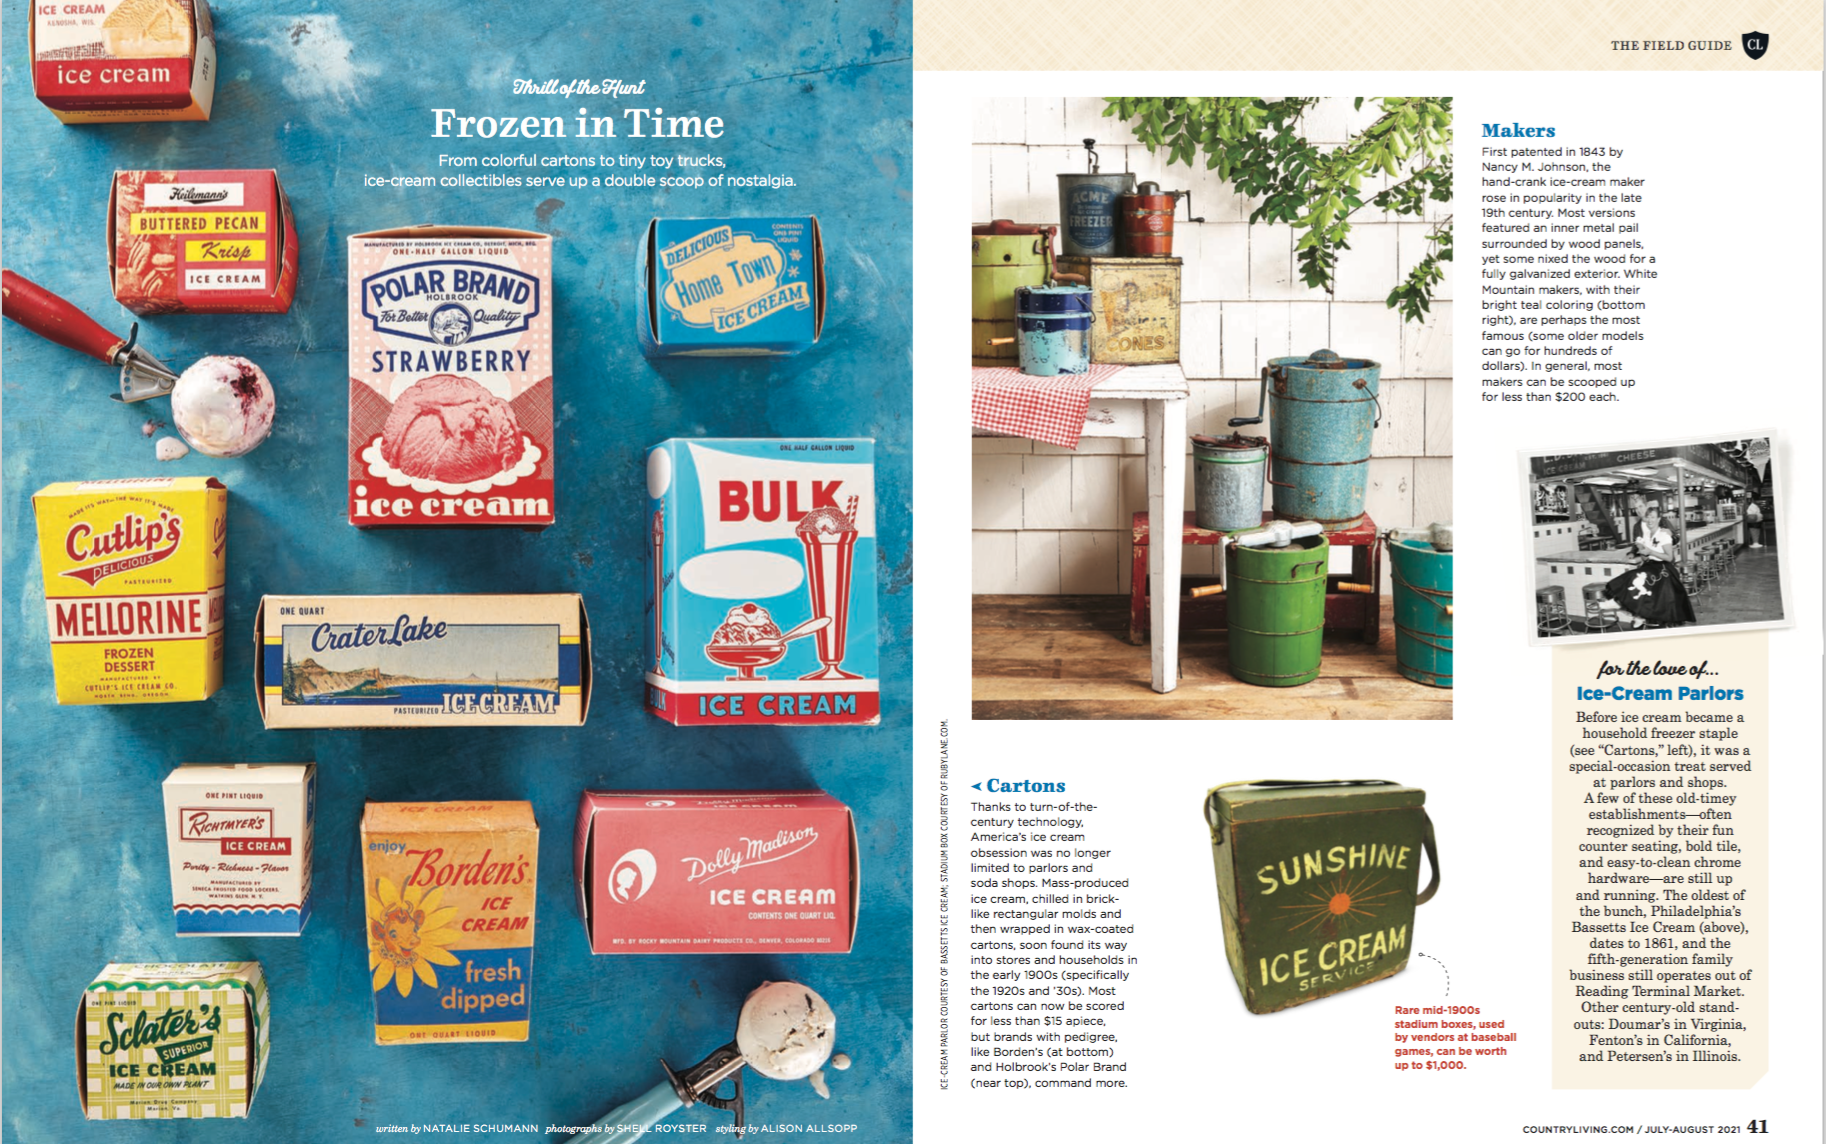 Country Living Magazine Frozen In Time Ice Cream